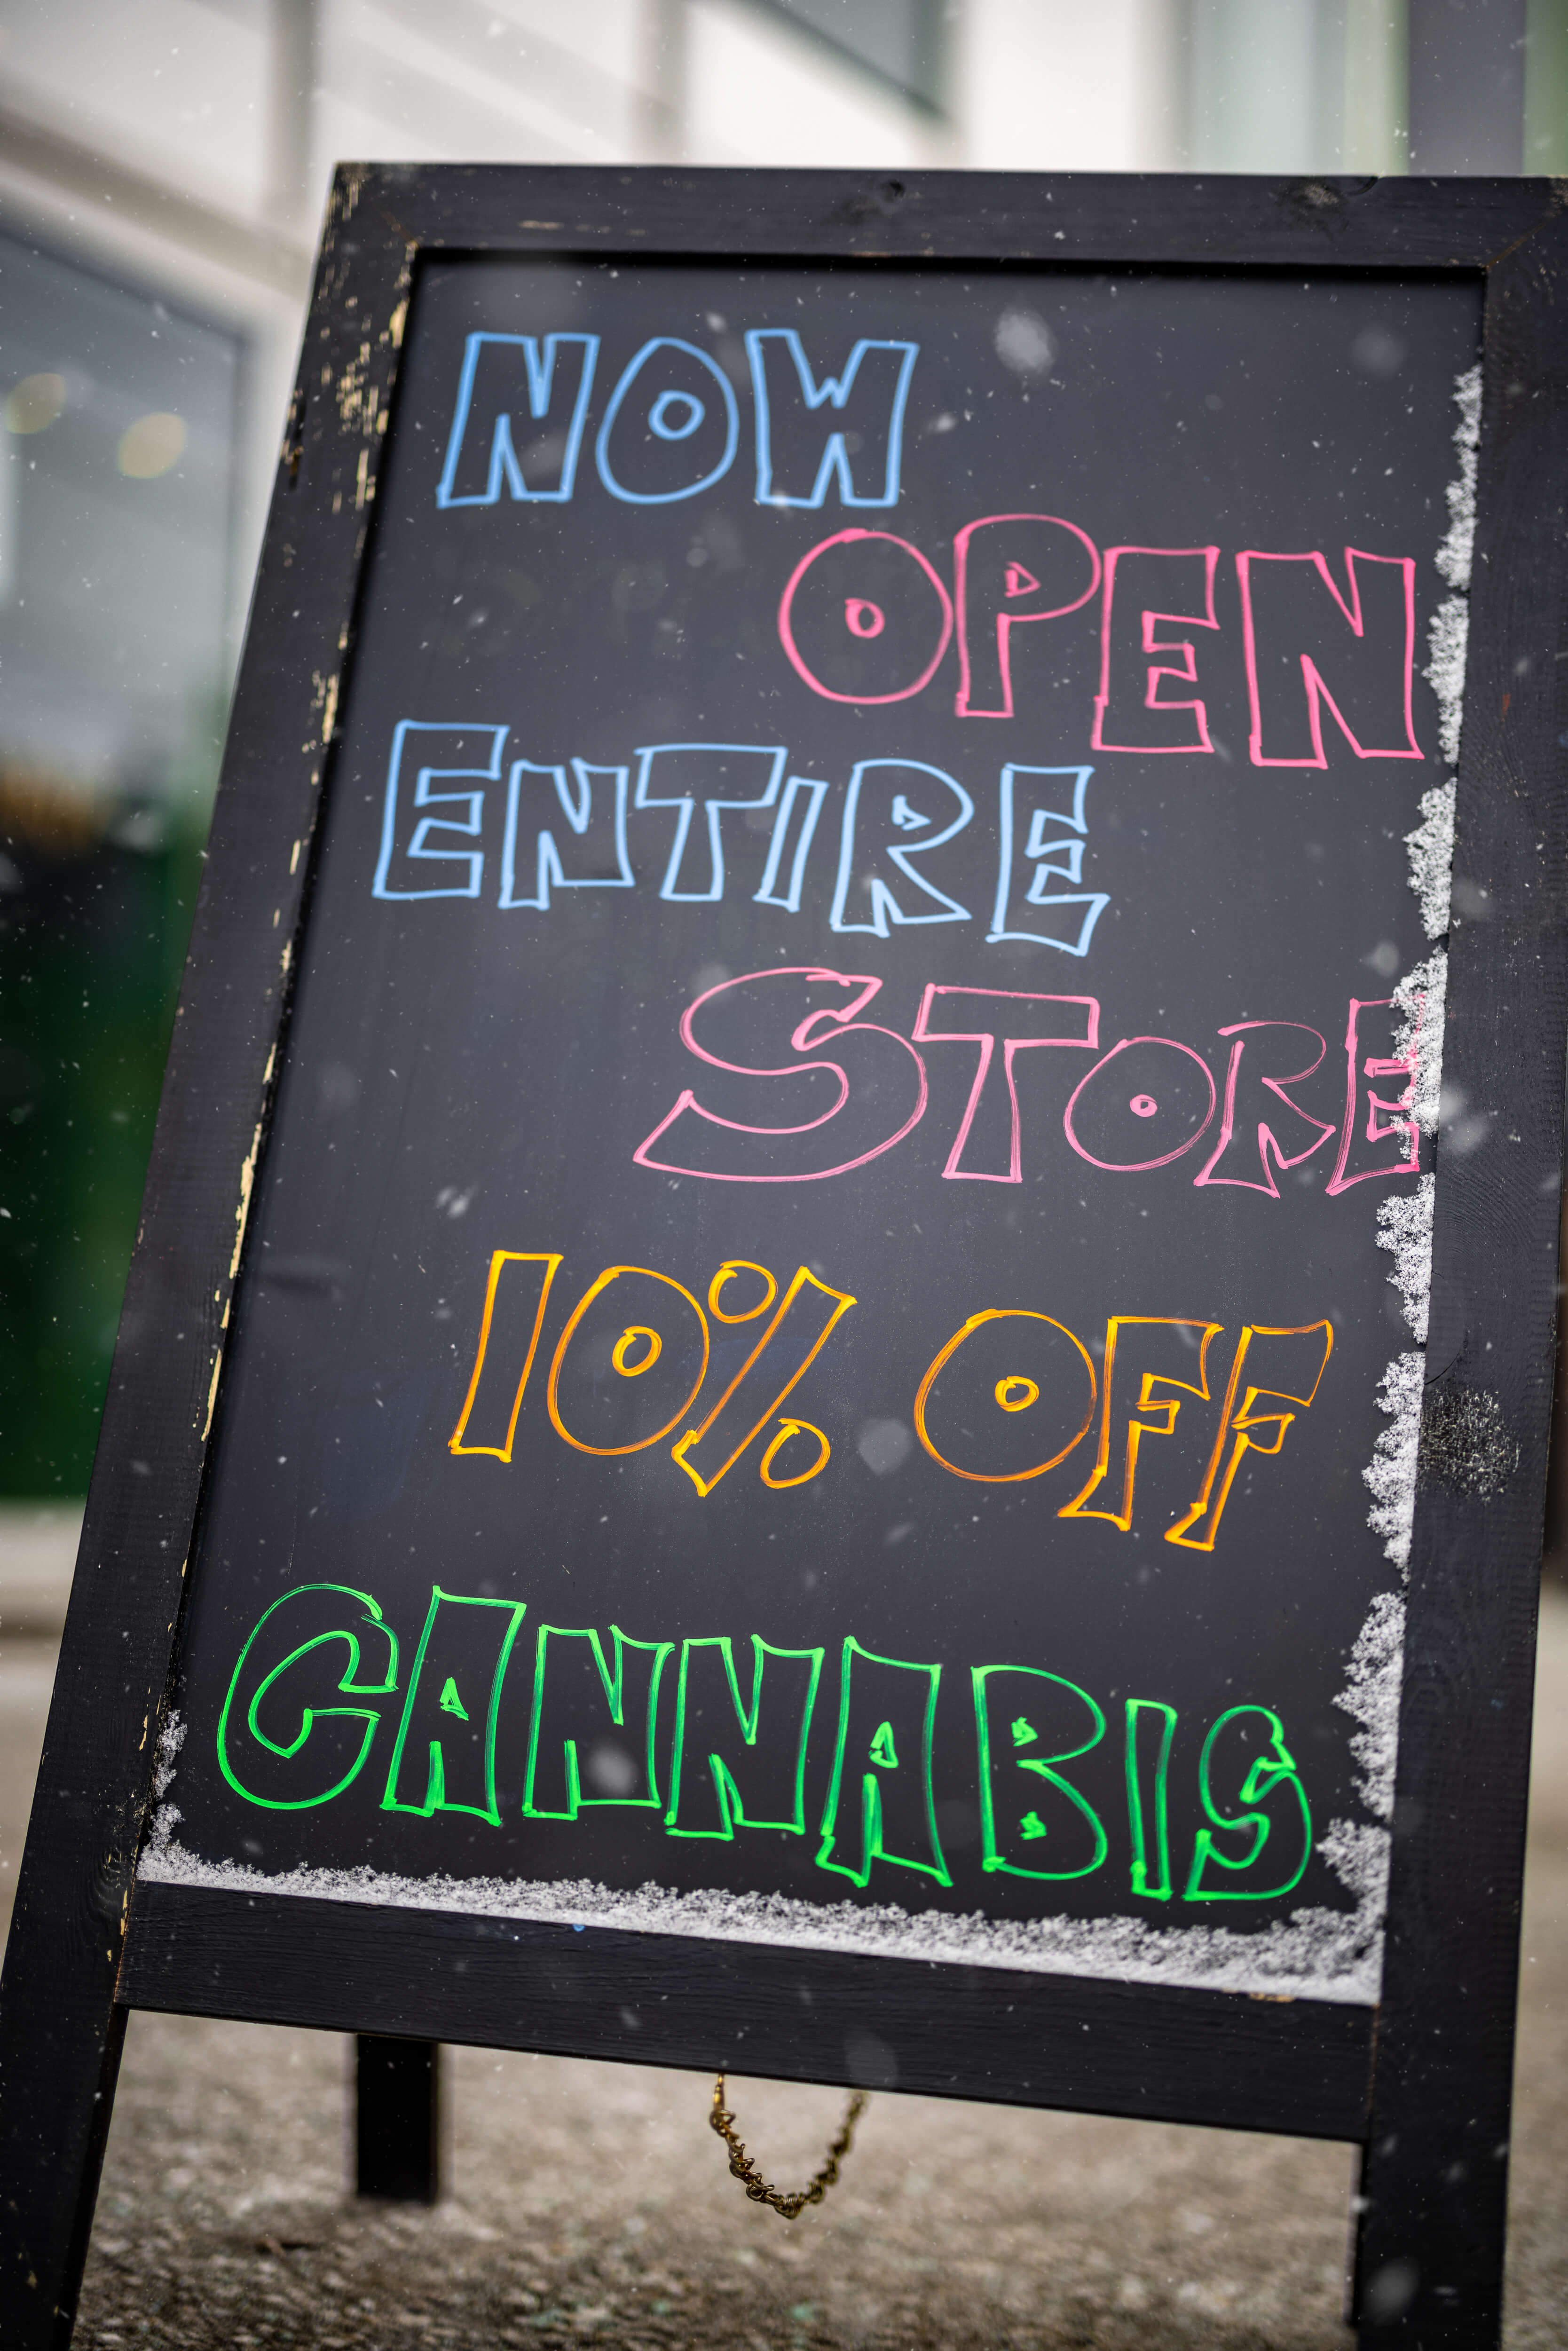 A sign advertising a sale of 10% off all cannabis in store